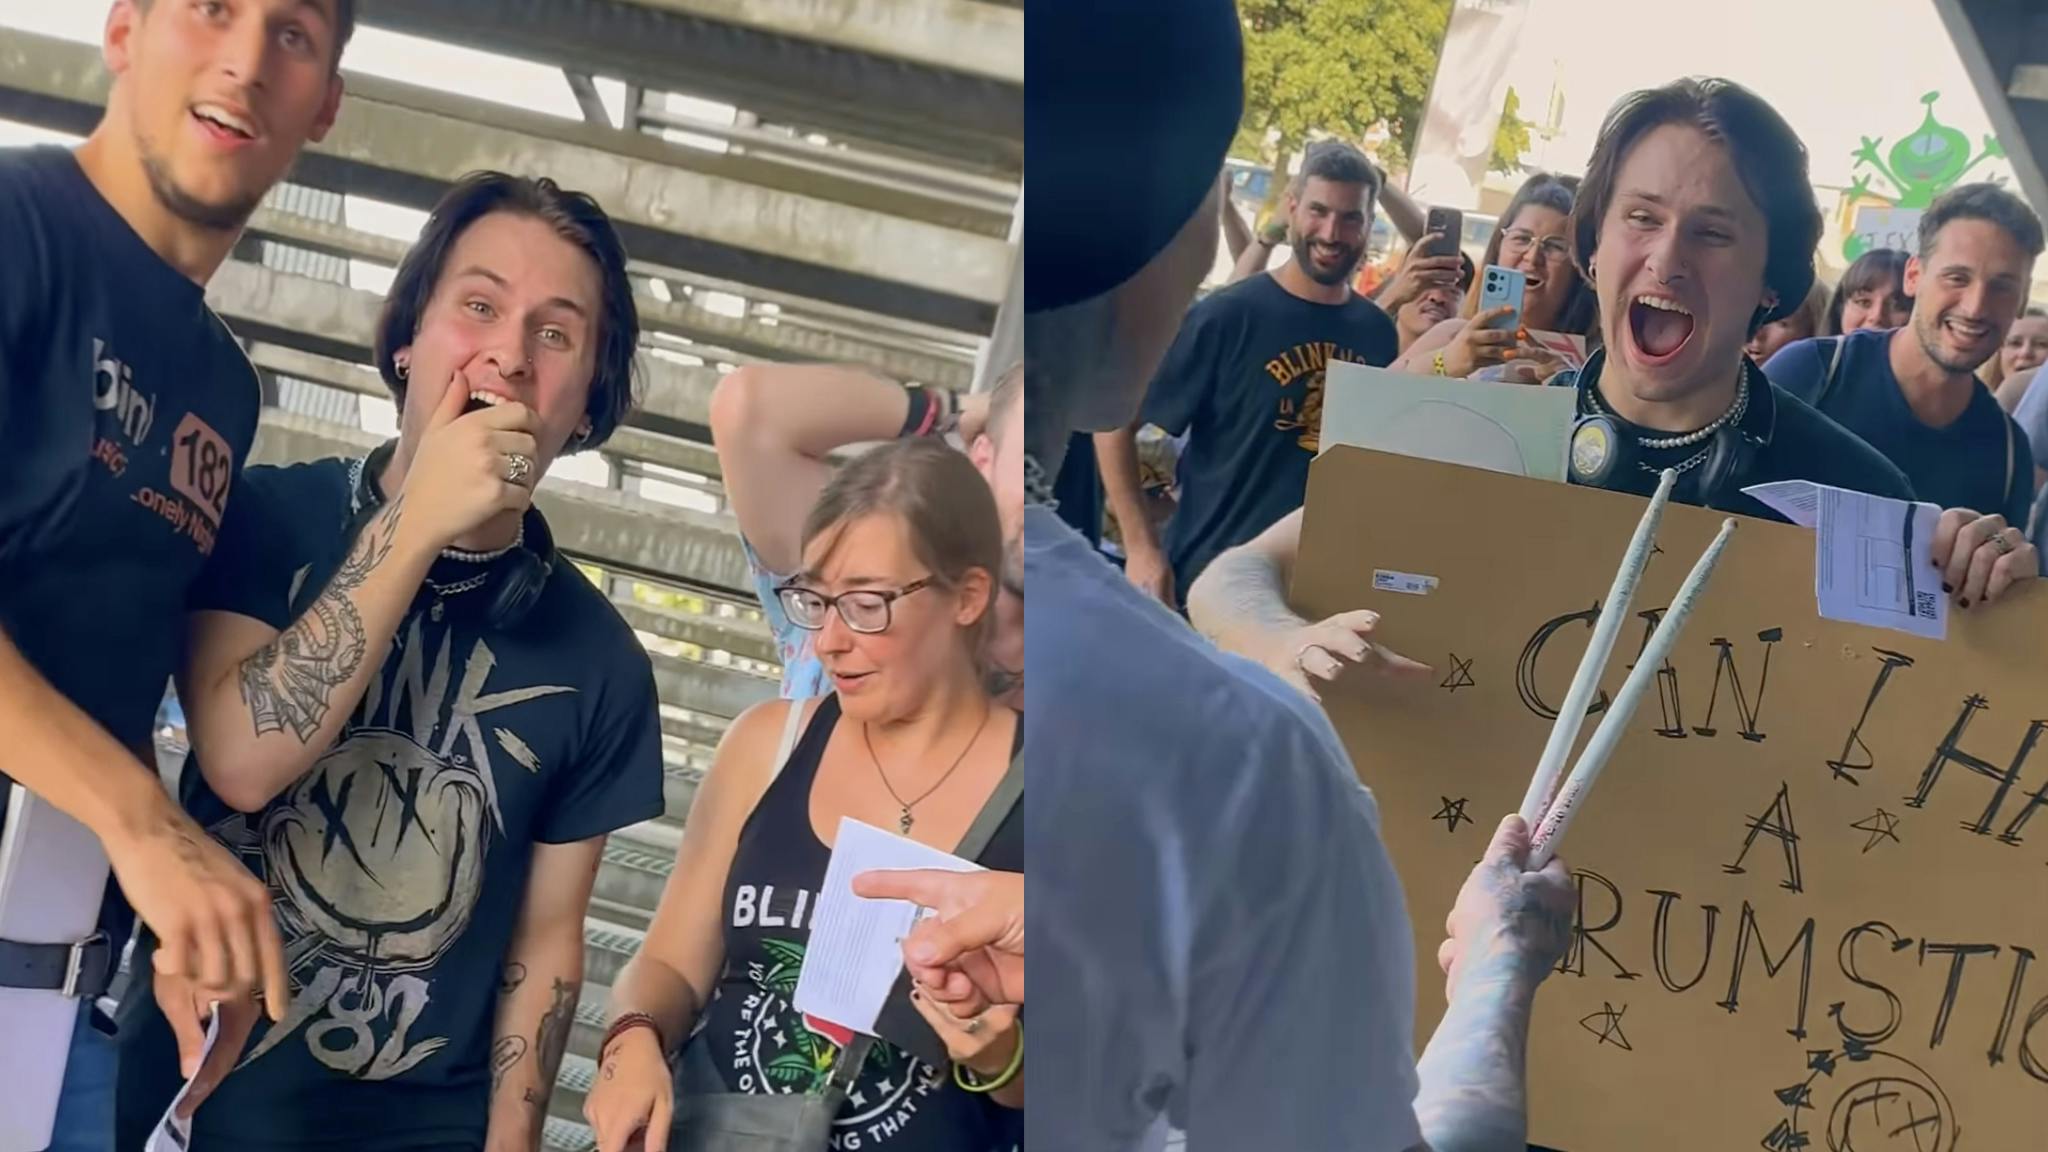 See Travis Barker personally gift a fan drumsticks on the first day of blink-182’s tour